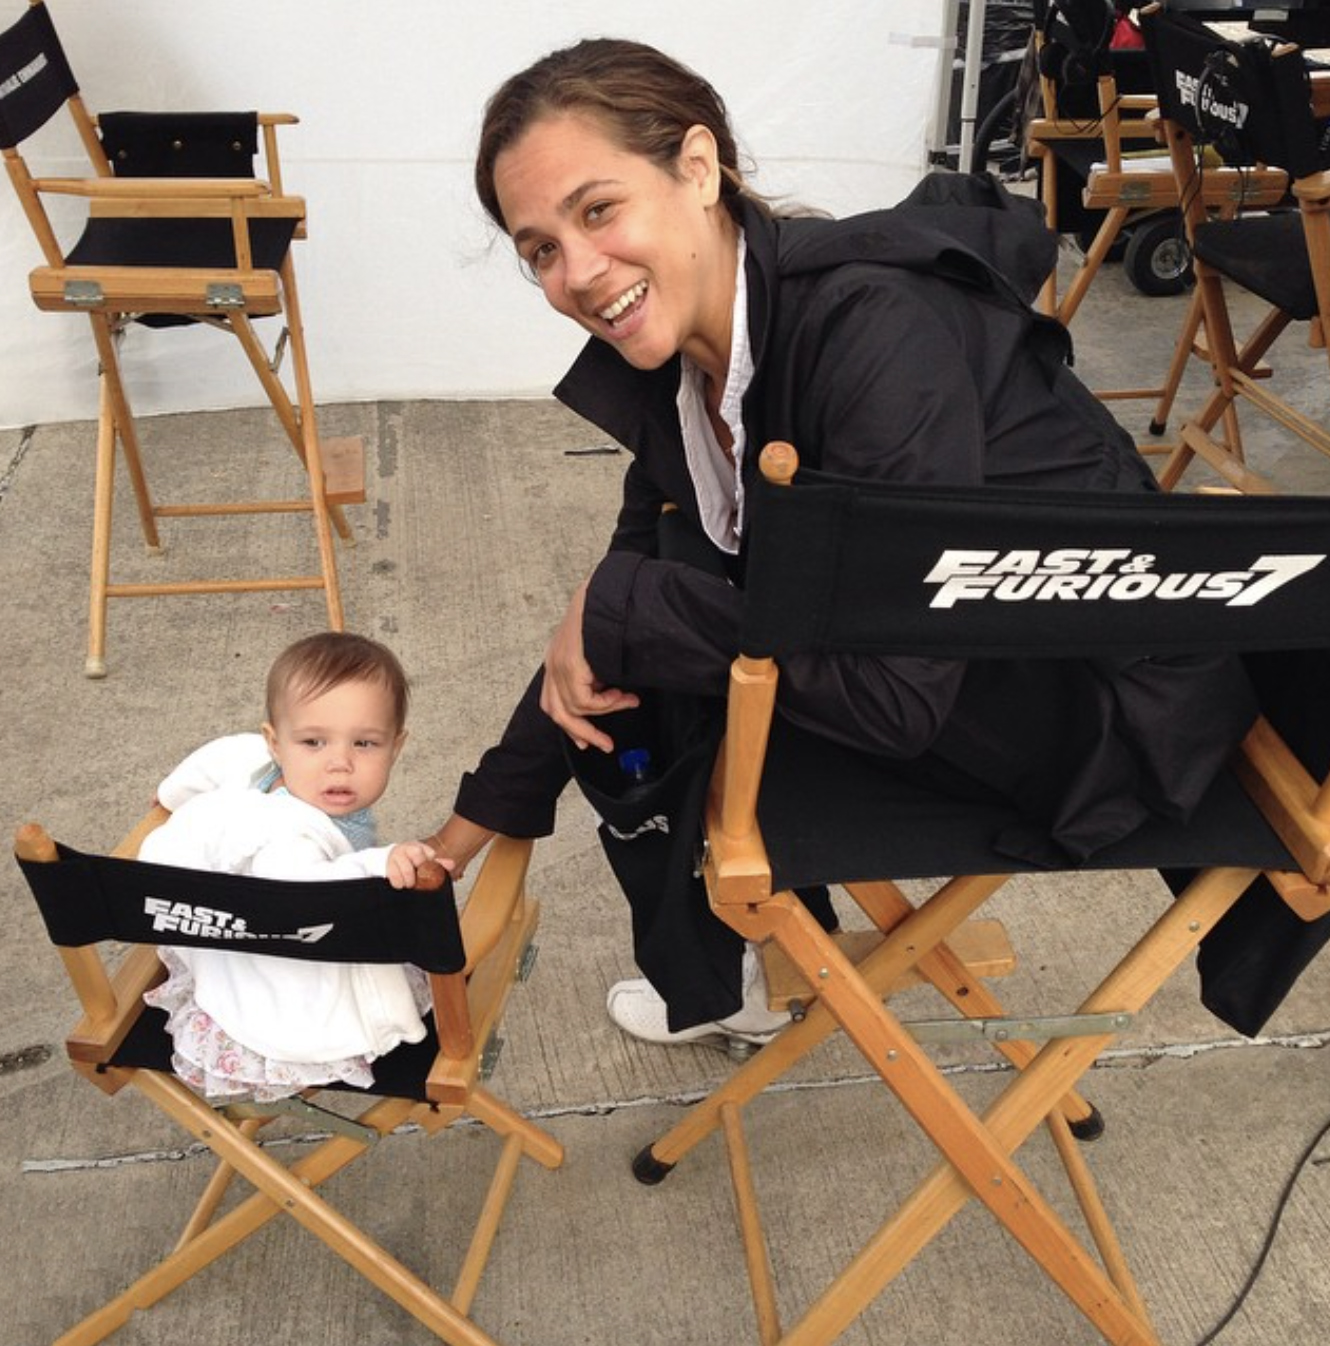 Samantha Vincent with her then-6-month-old daughter on the set of Fast & Furious 7